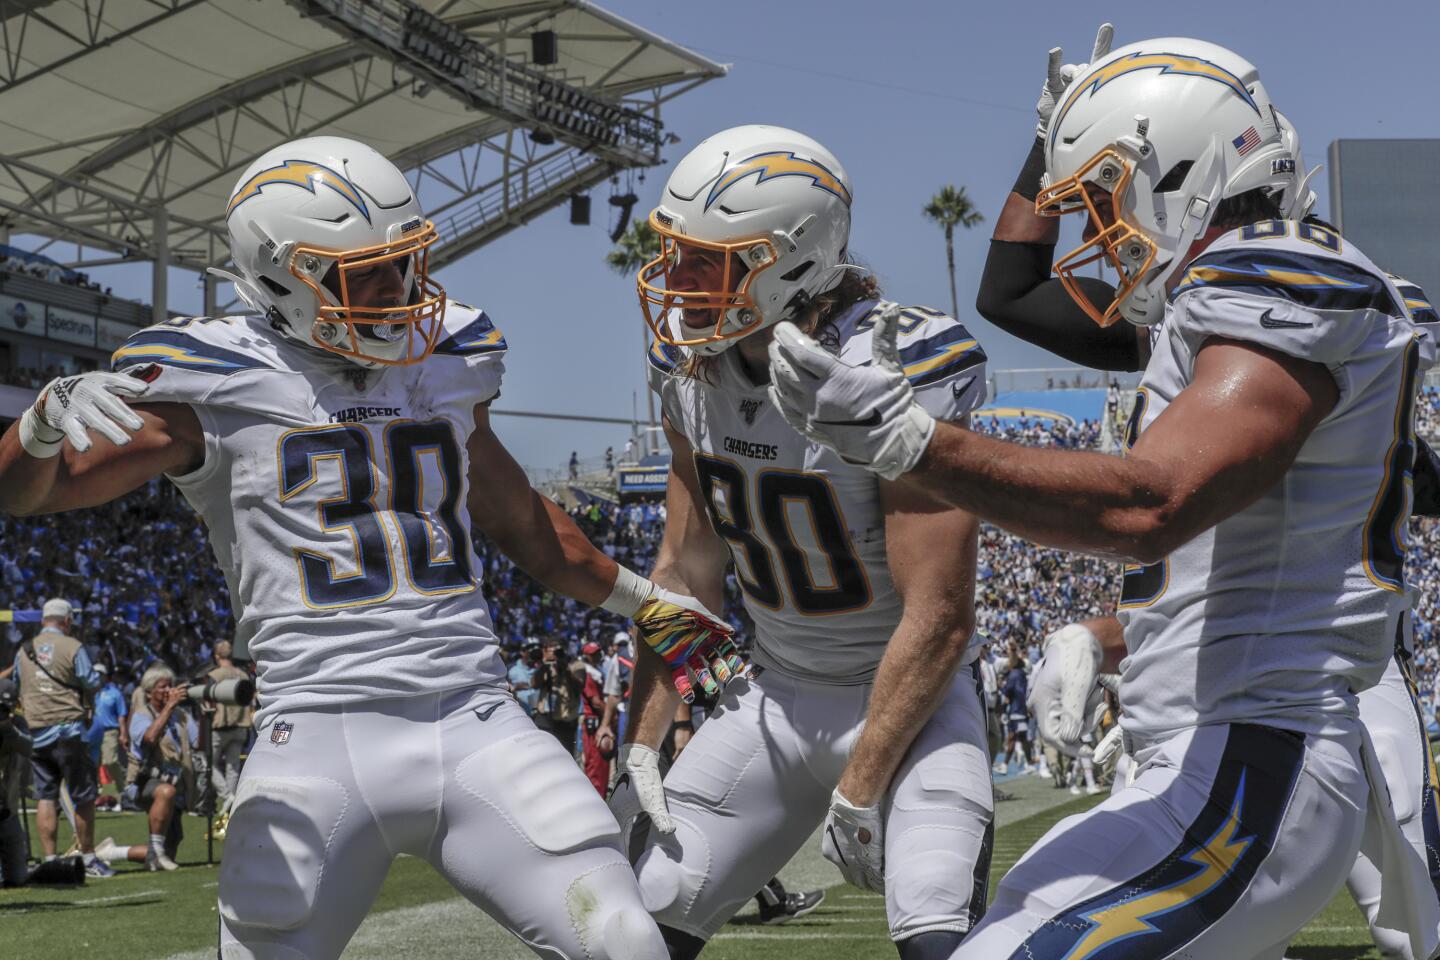 CARSON, CA, SUNDAY, SEPTEMBER 8, 2019 - Chargers running back Austin Ekeler celebrates a touchdown with teammates in the first quarter against the Colts at Dignity Health Sports Park. (Robert Gauthier/Los Angeles Times)